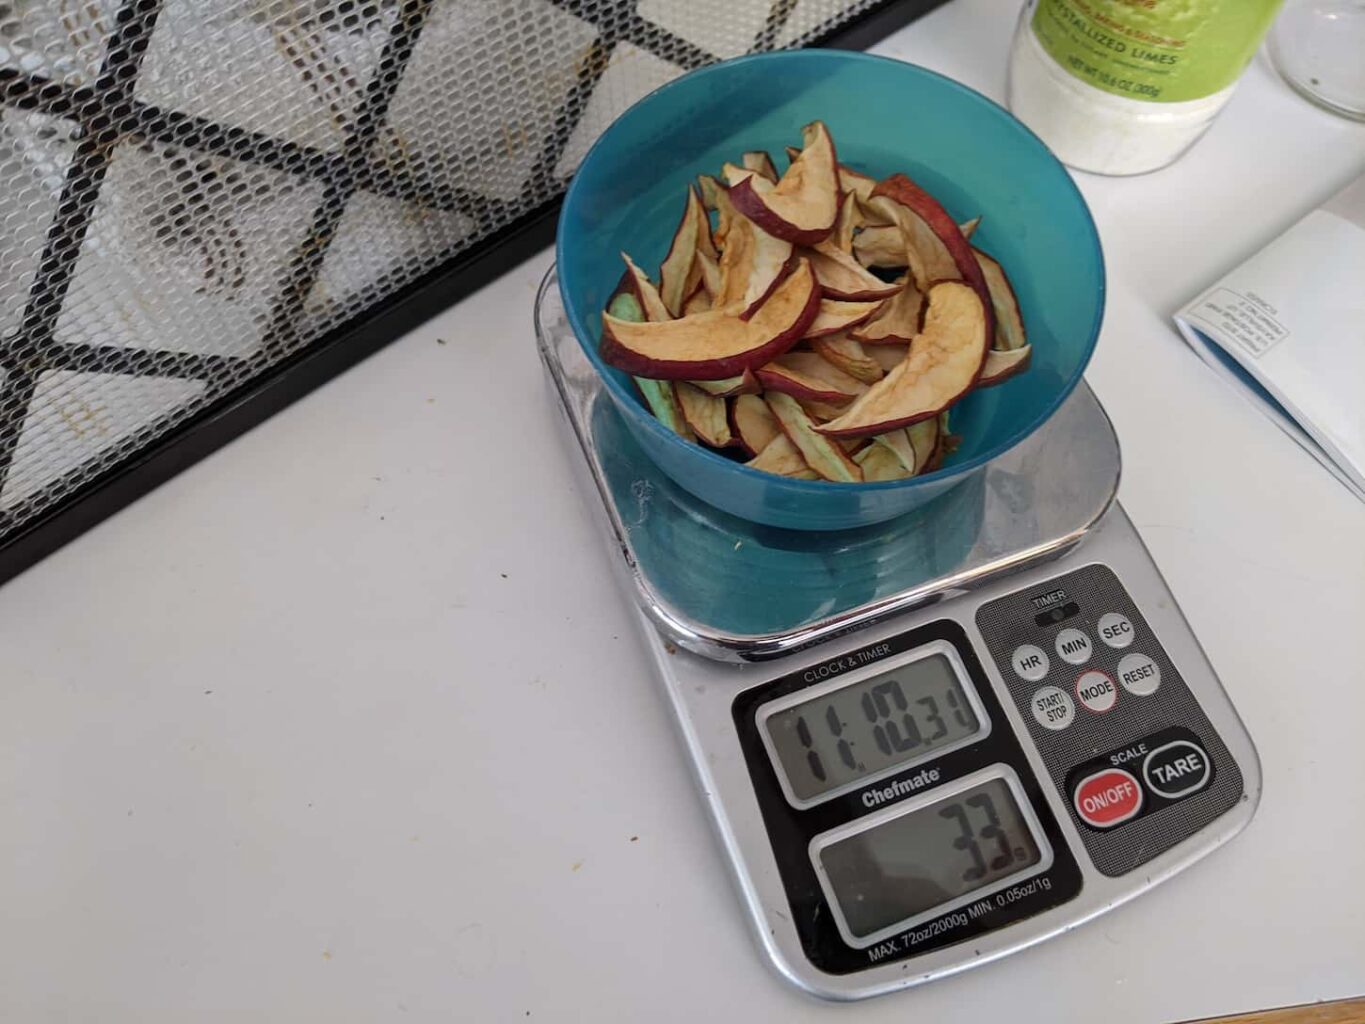 An image of dehydrated apples being weighed.